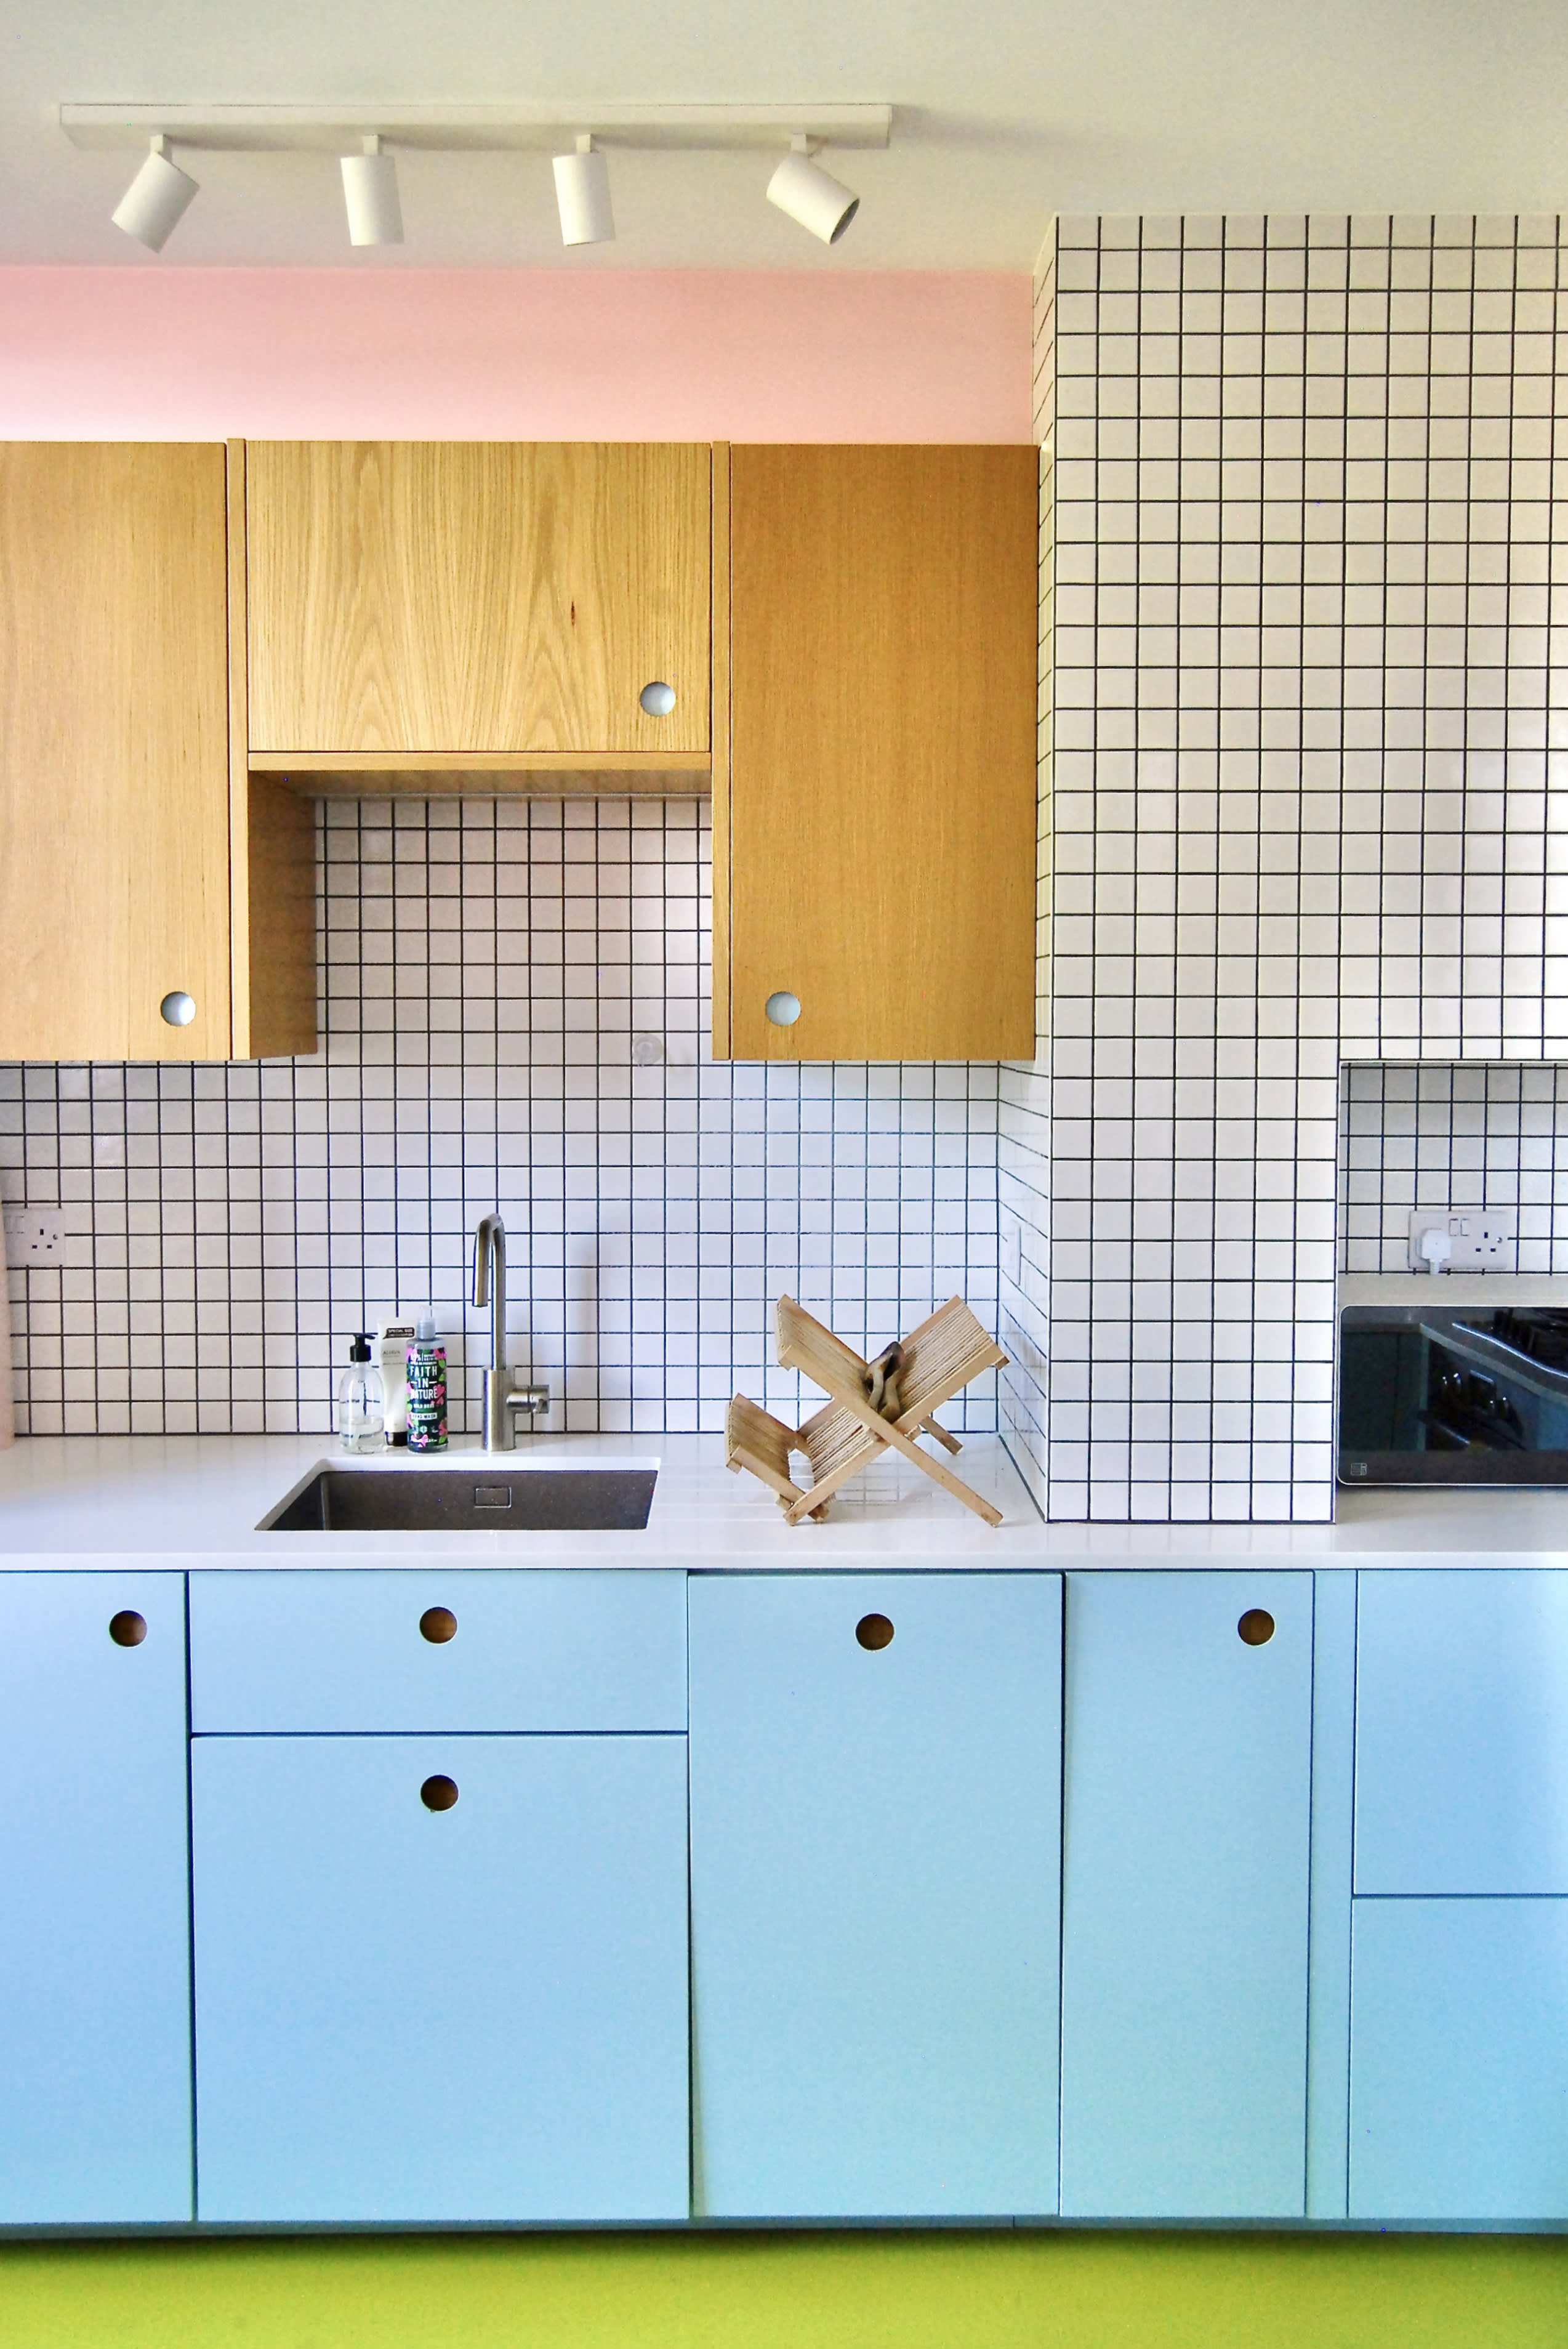 33 genius tips for Organizing a Kitchen (no. 31 is a MUST for